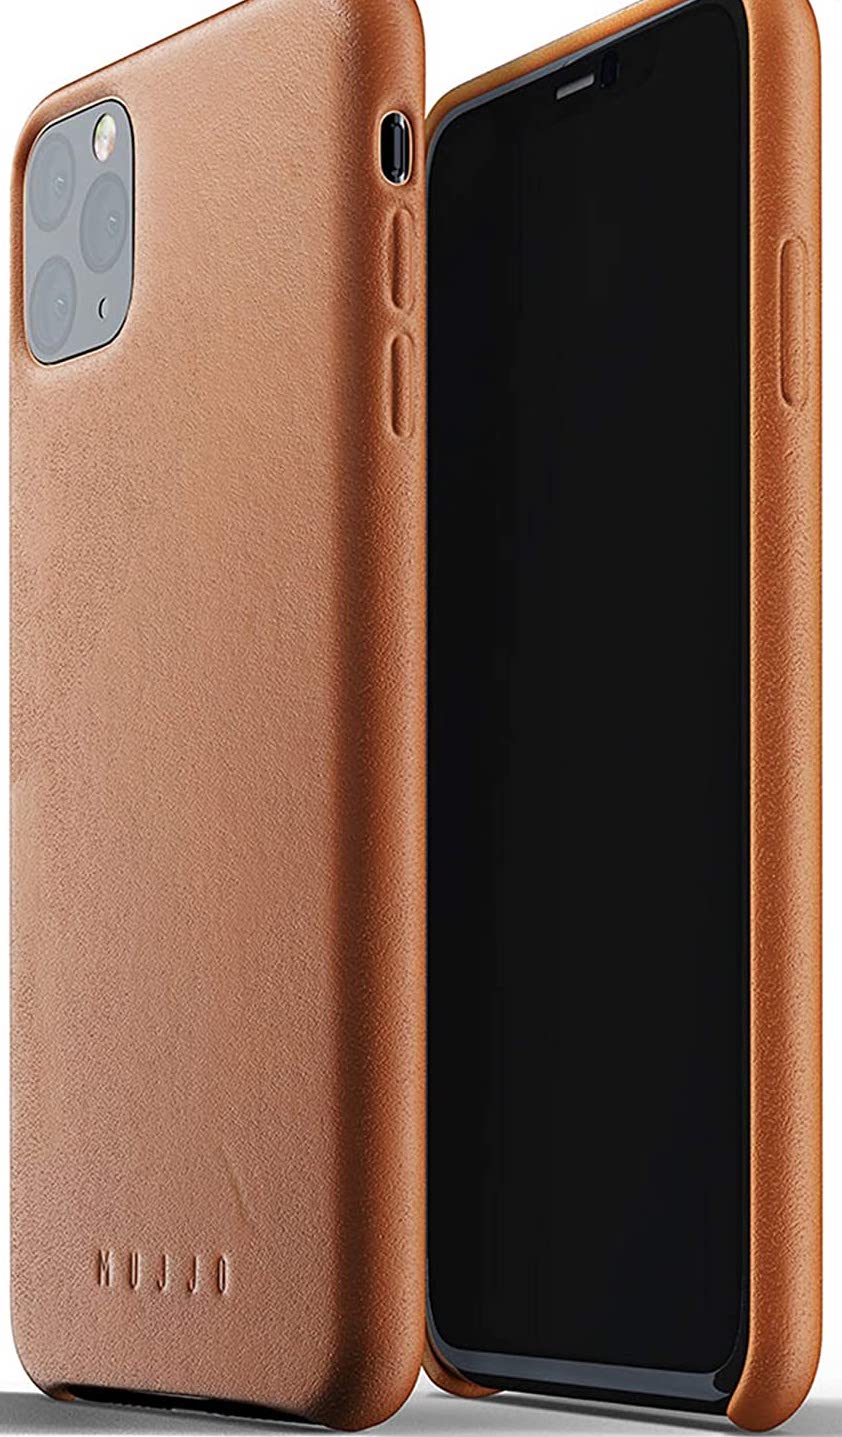 Muijo Full Leather case for the iPhone 11 Pro Max